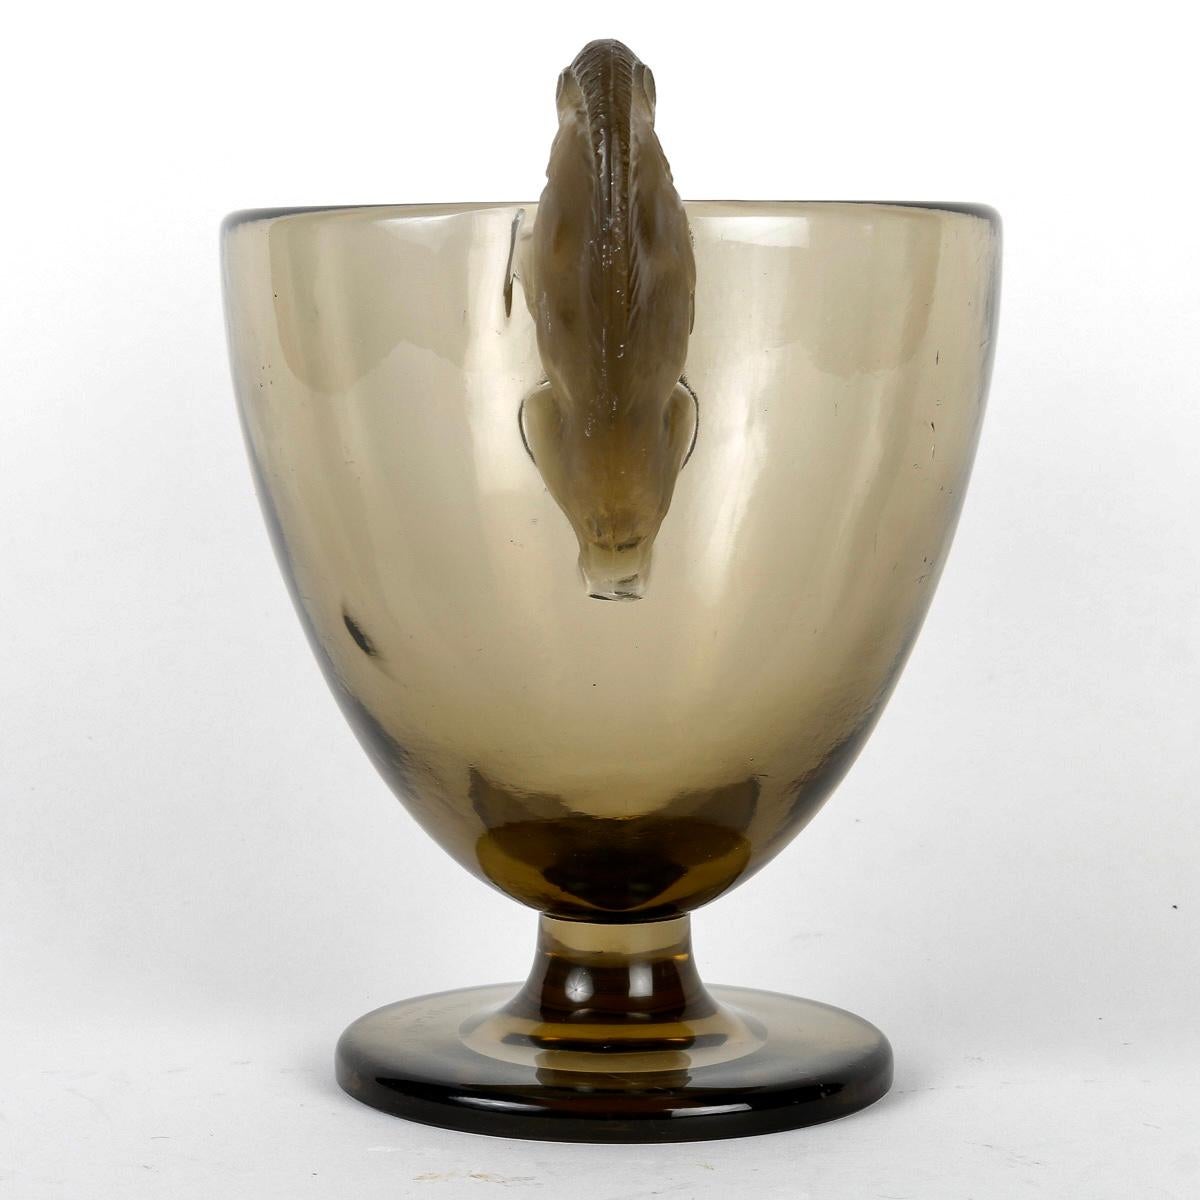 French 1925 Rene Lalique - Vase Beliers Vase Smoked Topaz Grey Glass For Sale